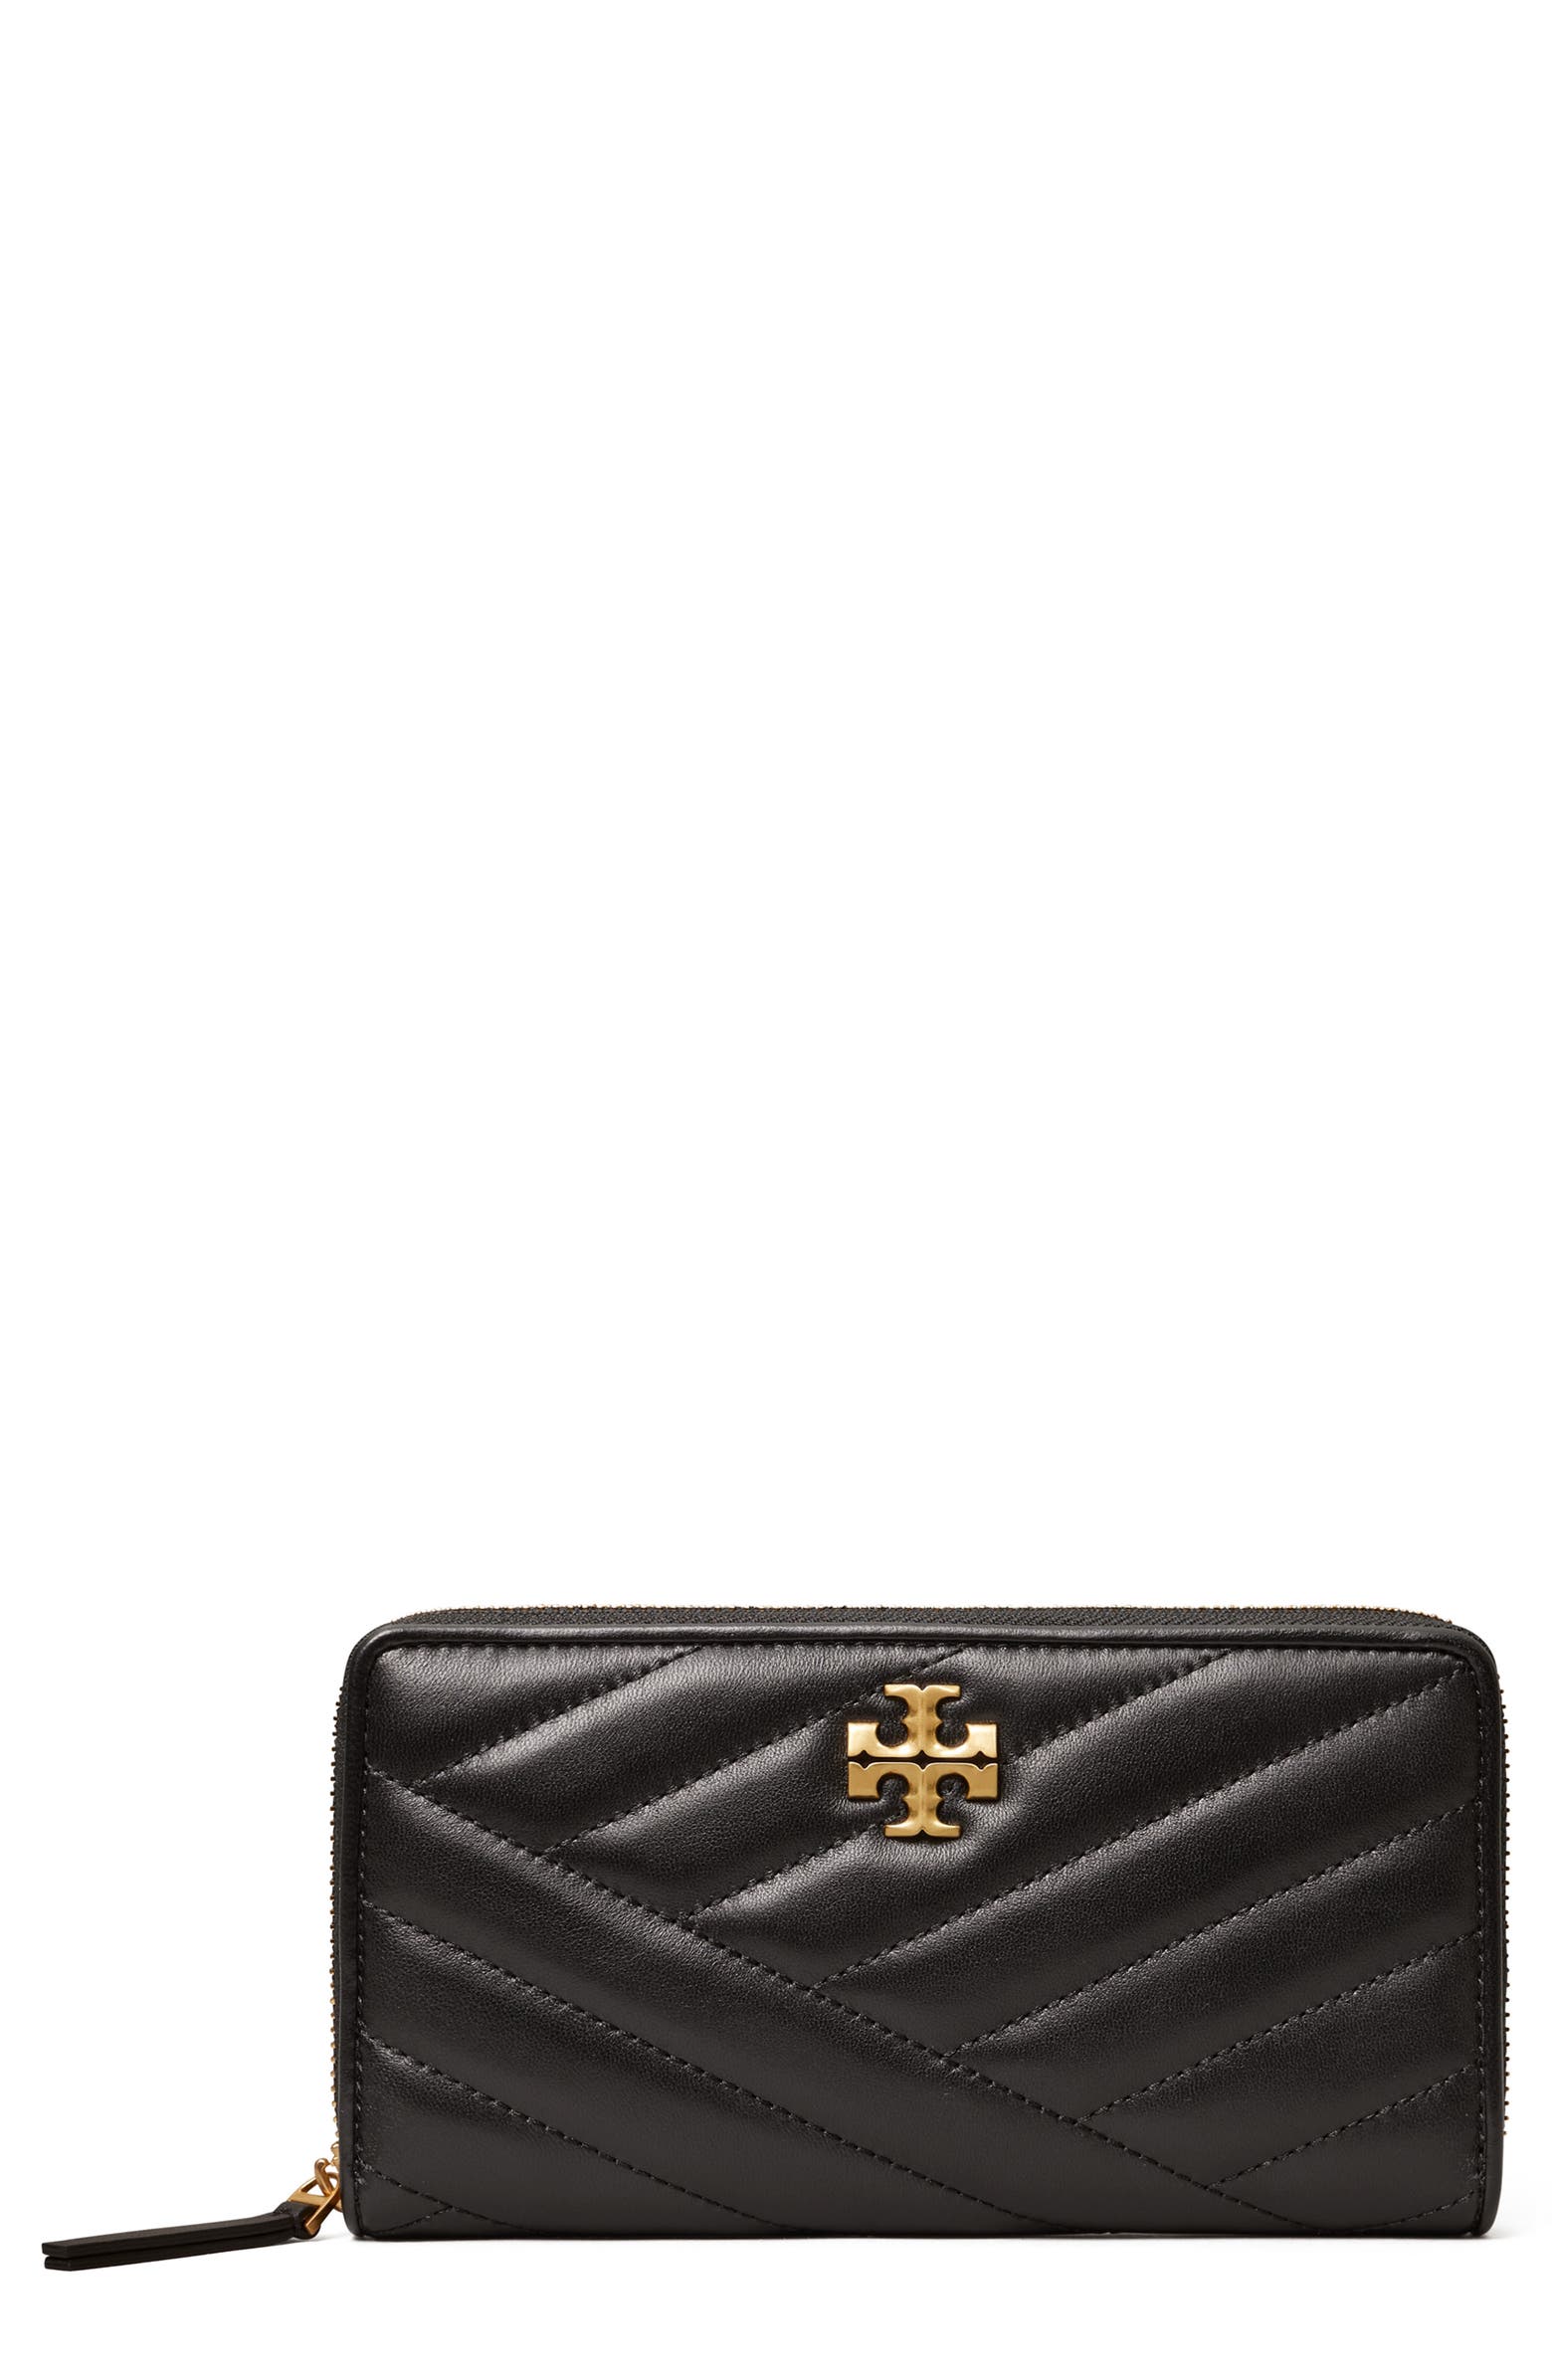 Black Tory Burch’s Kira Quilted Wallet